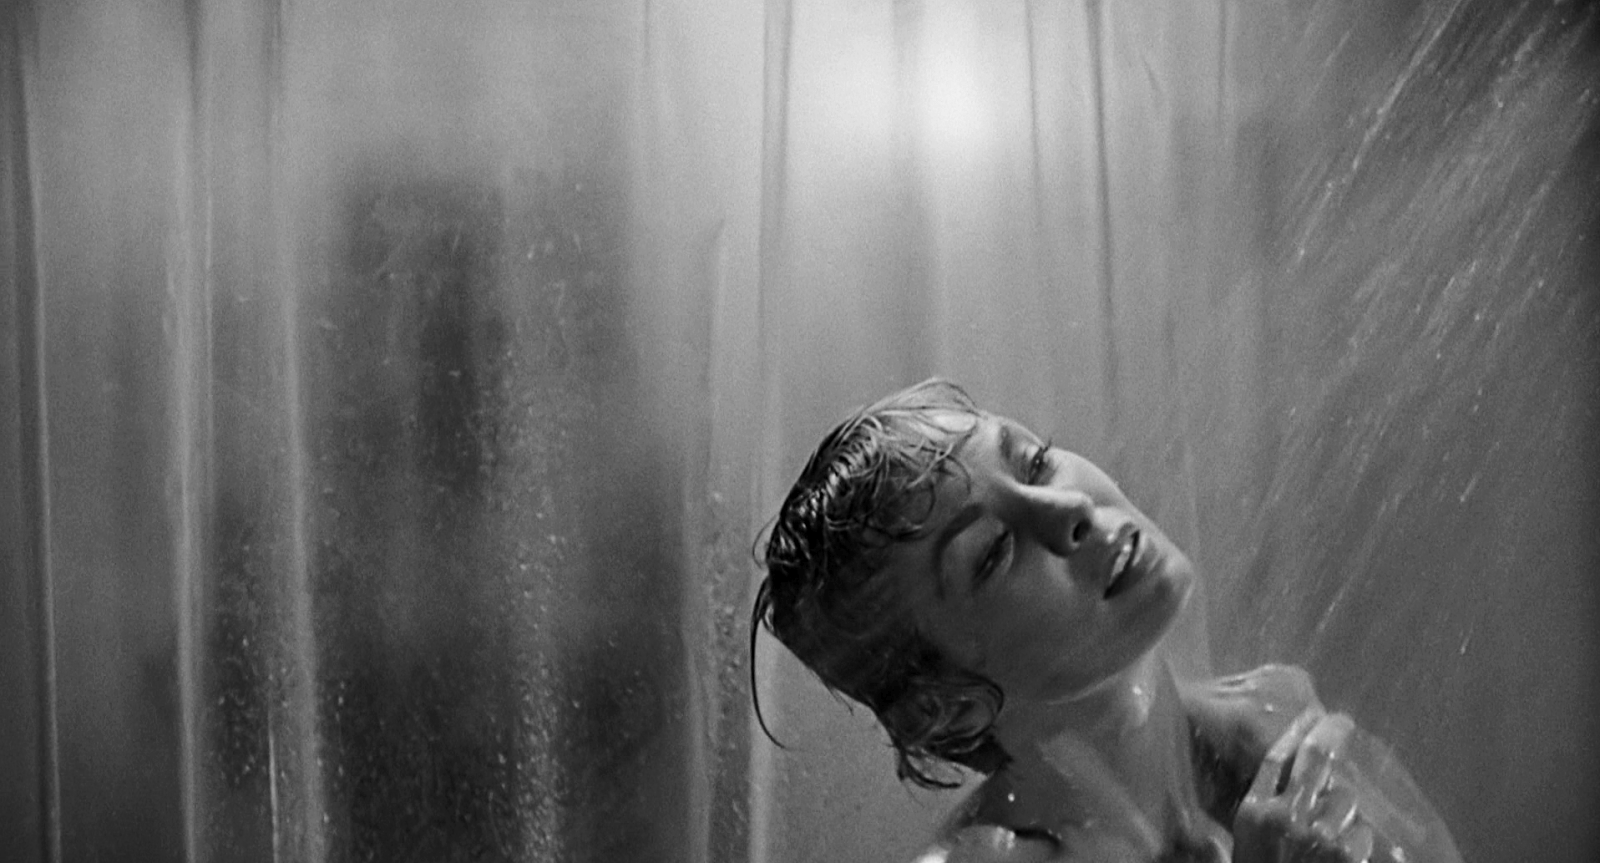 You Must Watch Alfred Hitchcock's 'Psycho' From the Beginning